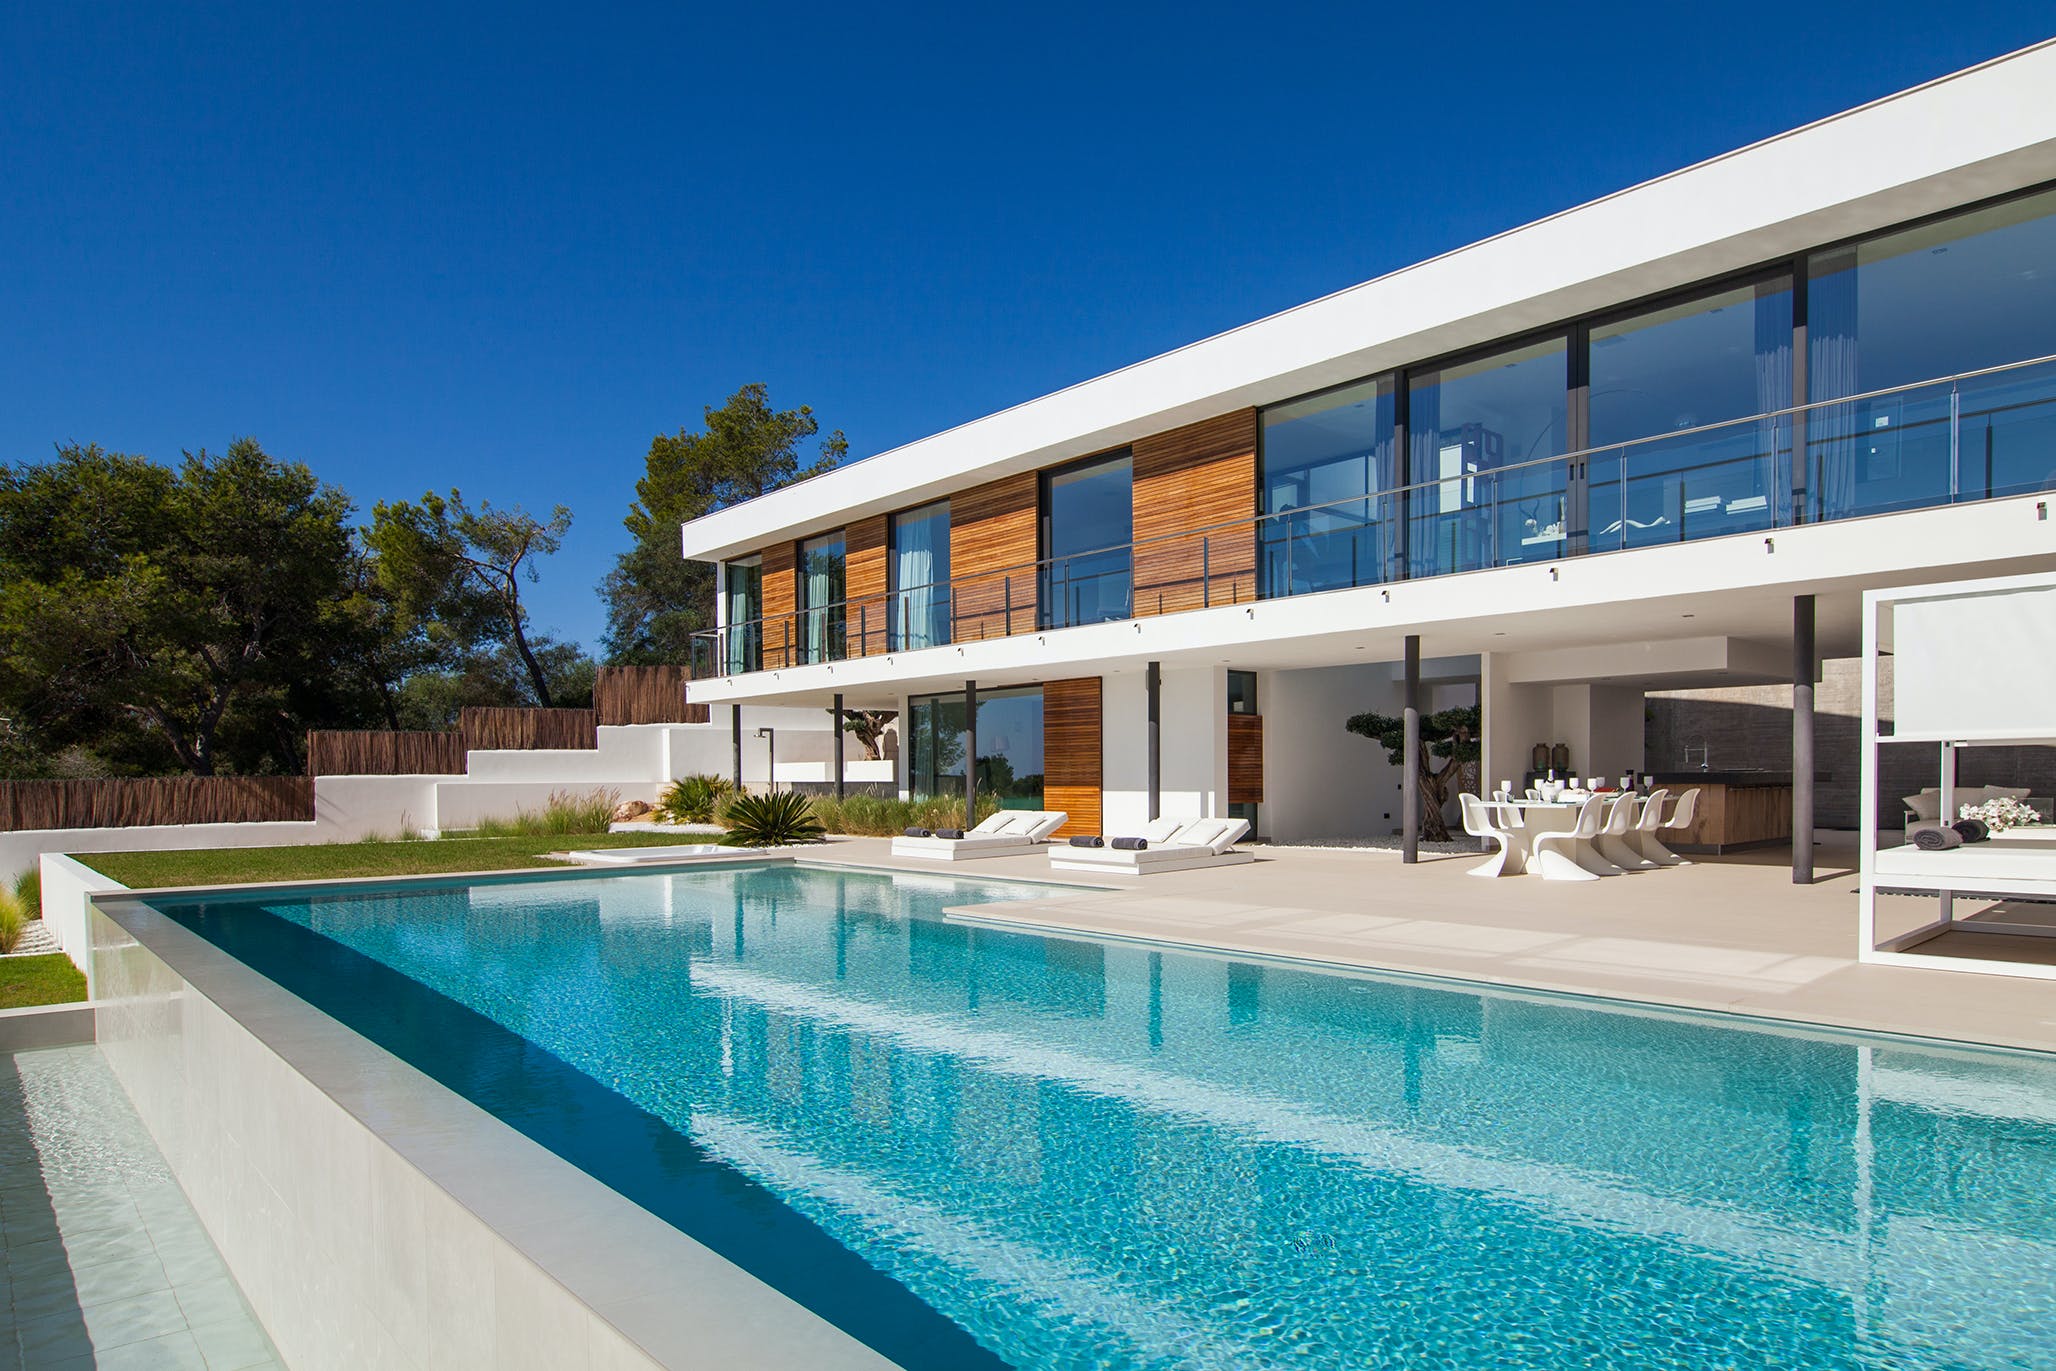 Luxury Villa with white exterior and swimming pool